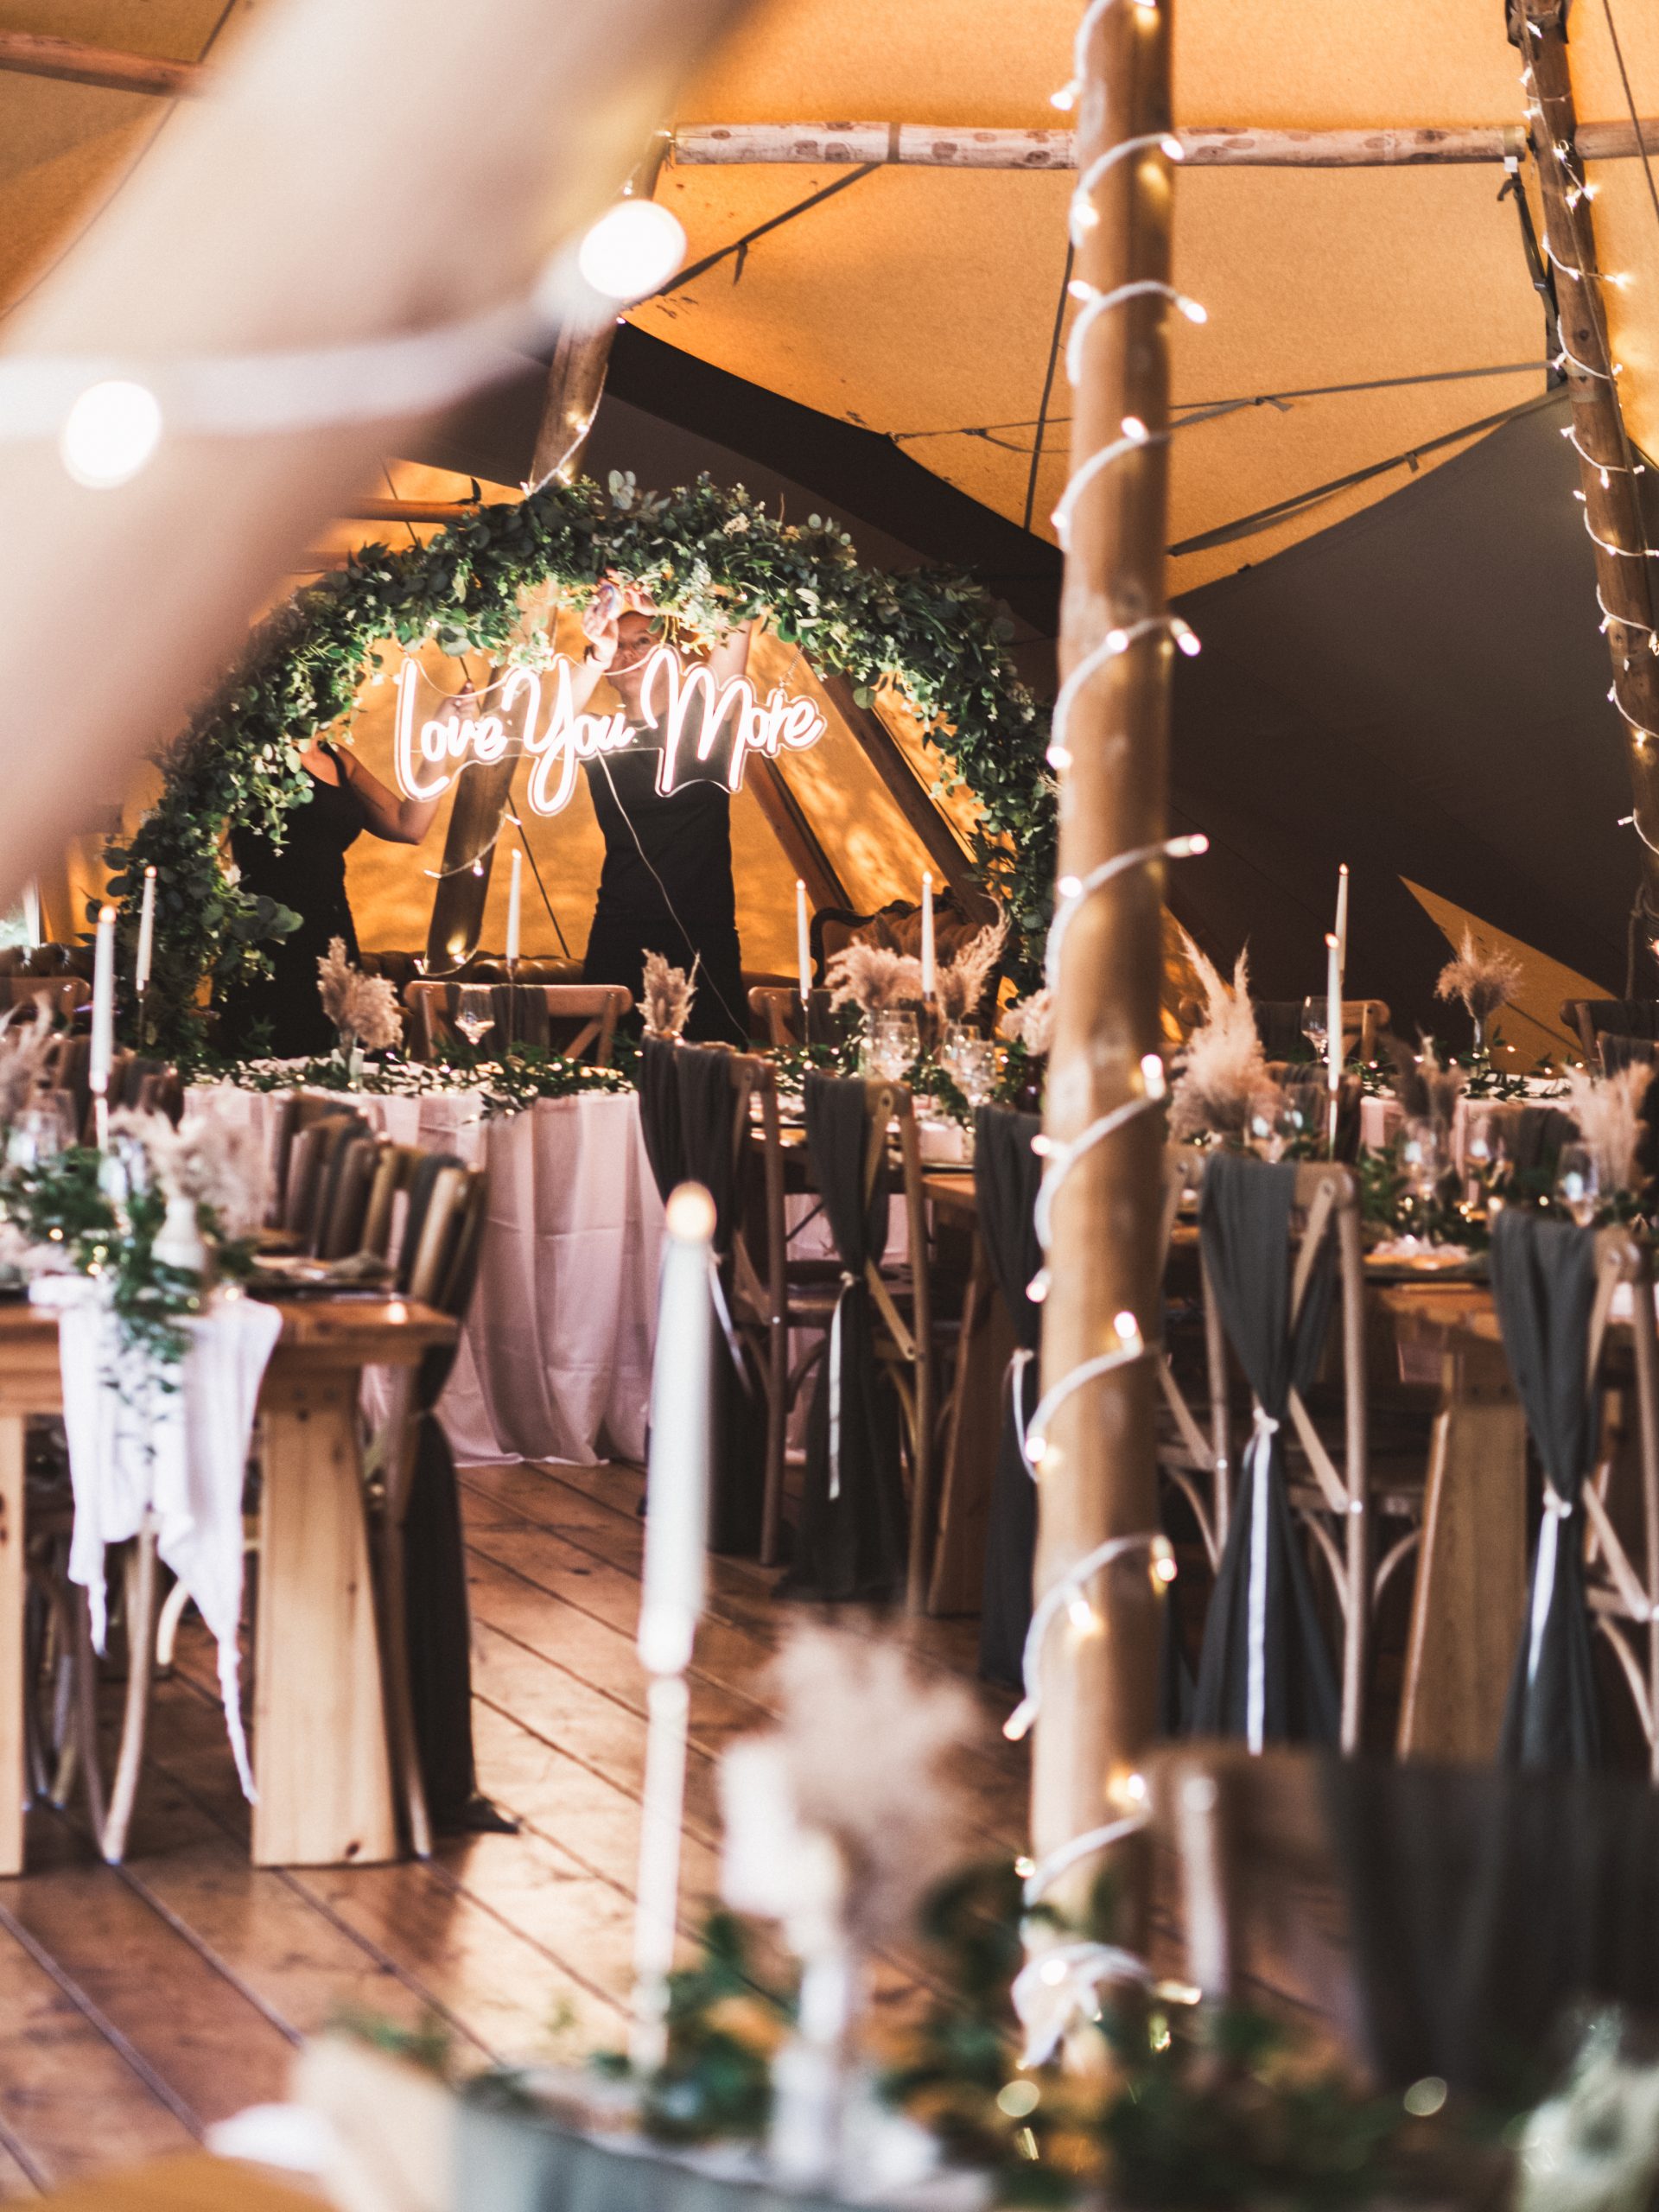 Luxury wedding venues in east midlands -Kirsty Great Photography